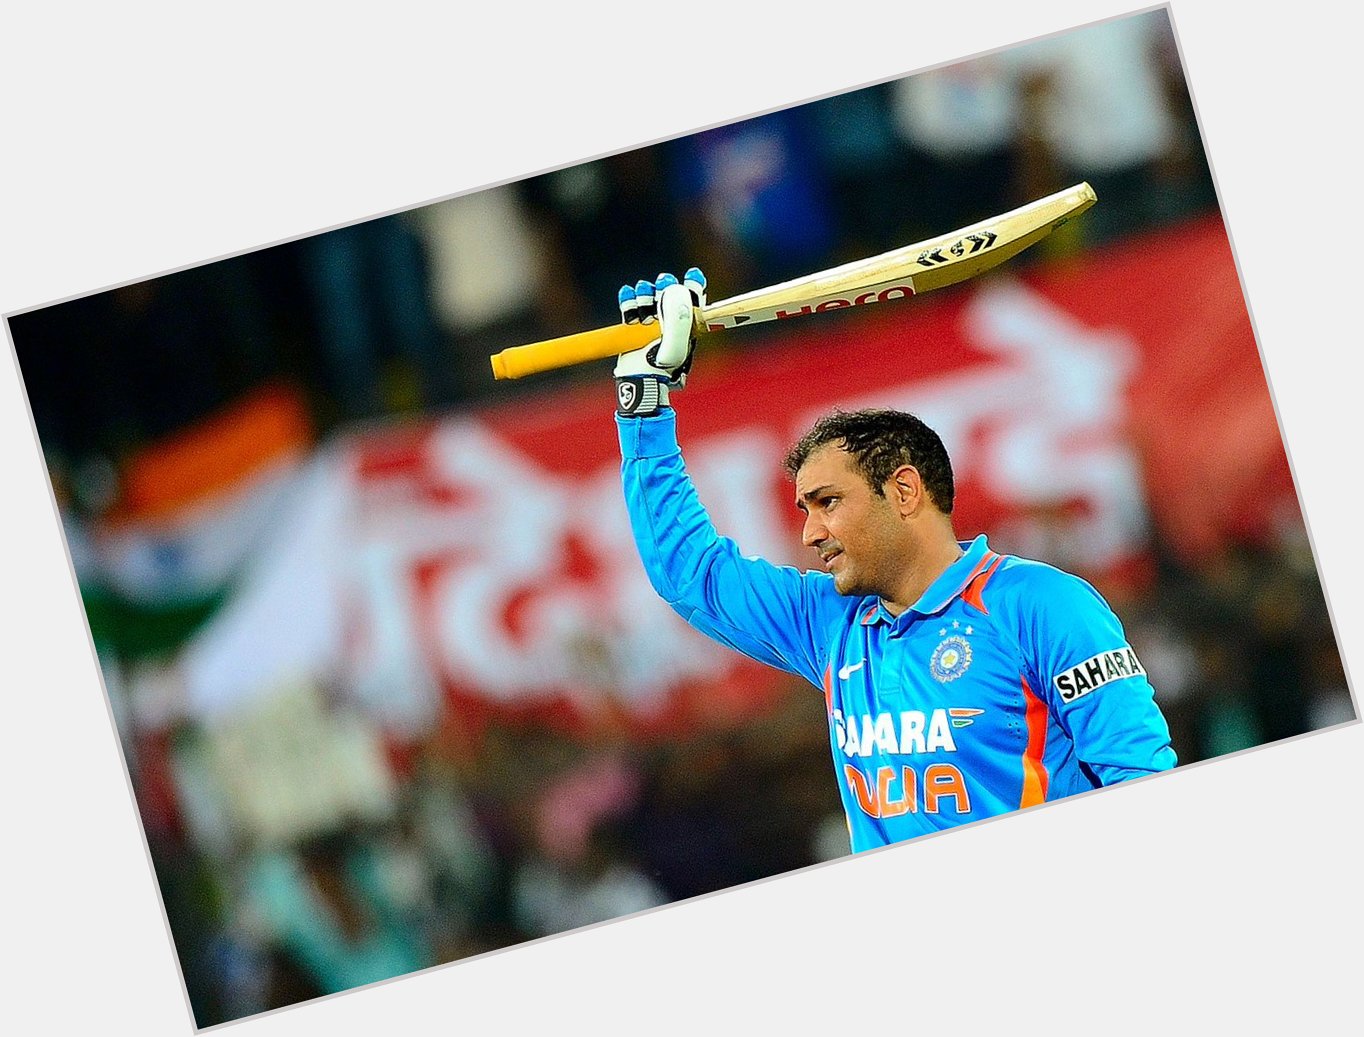 Happy birthday to a batsman who knew no fear: Virender Sehwag! 